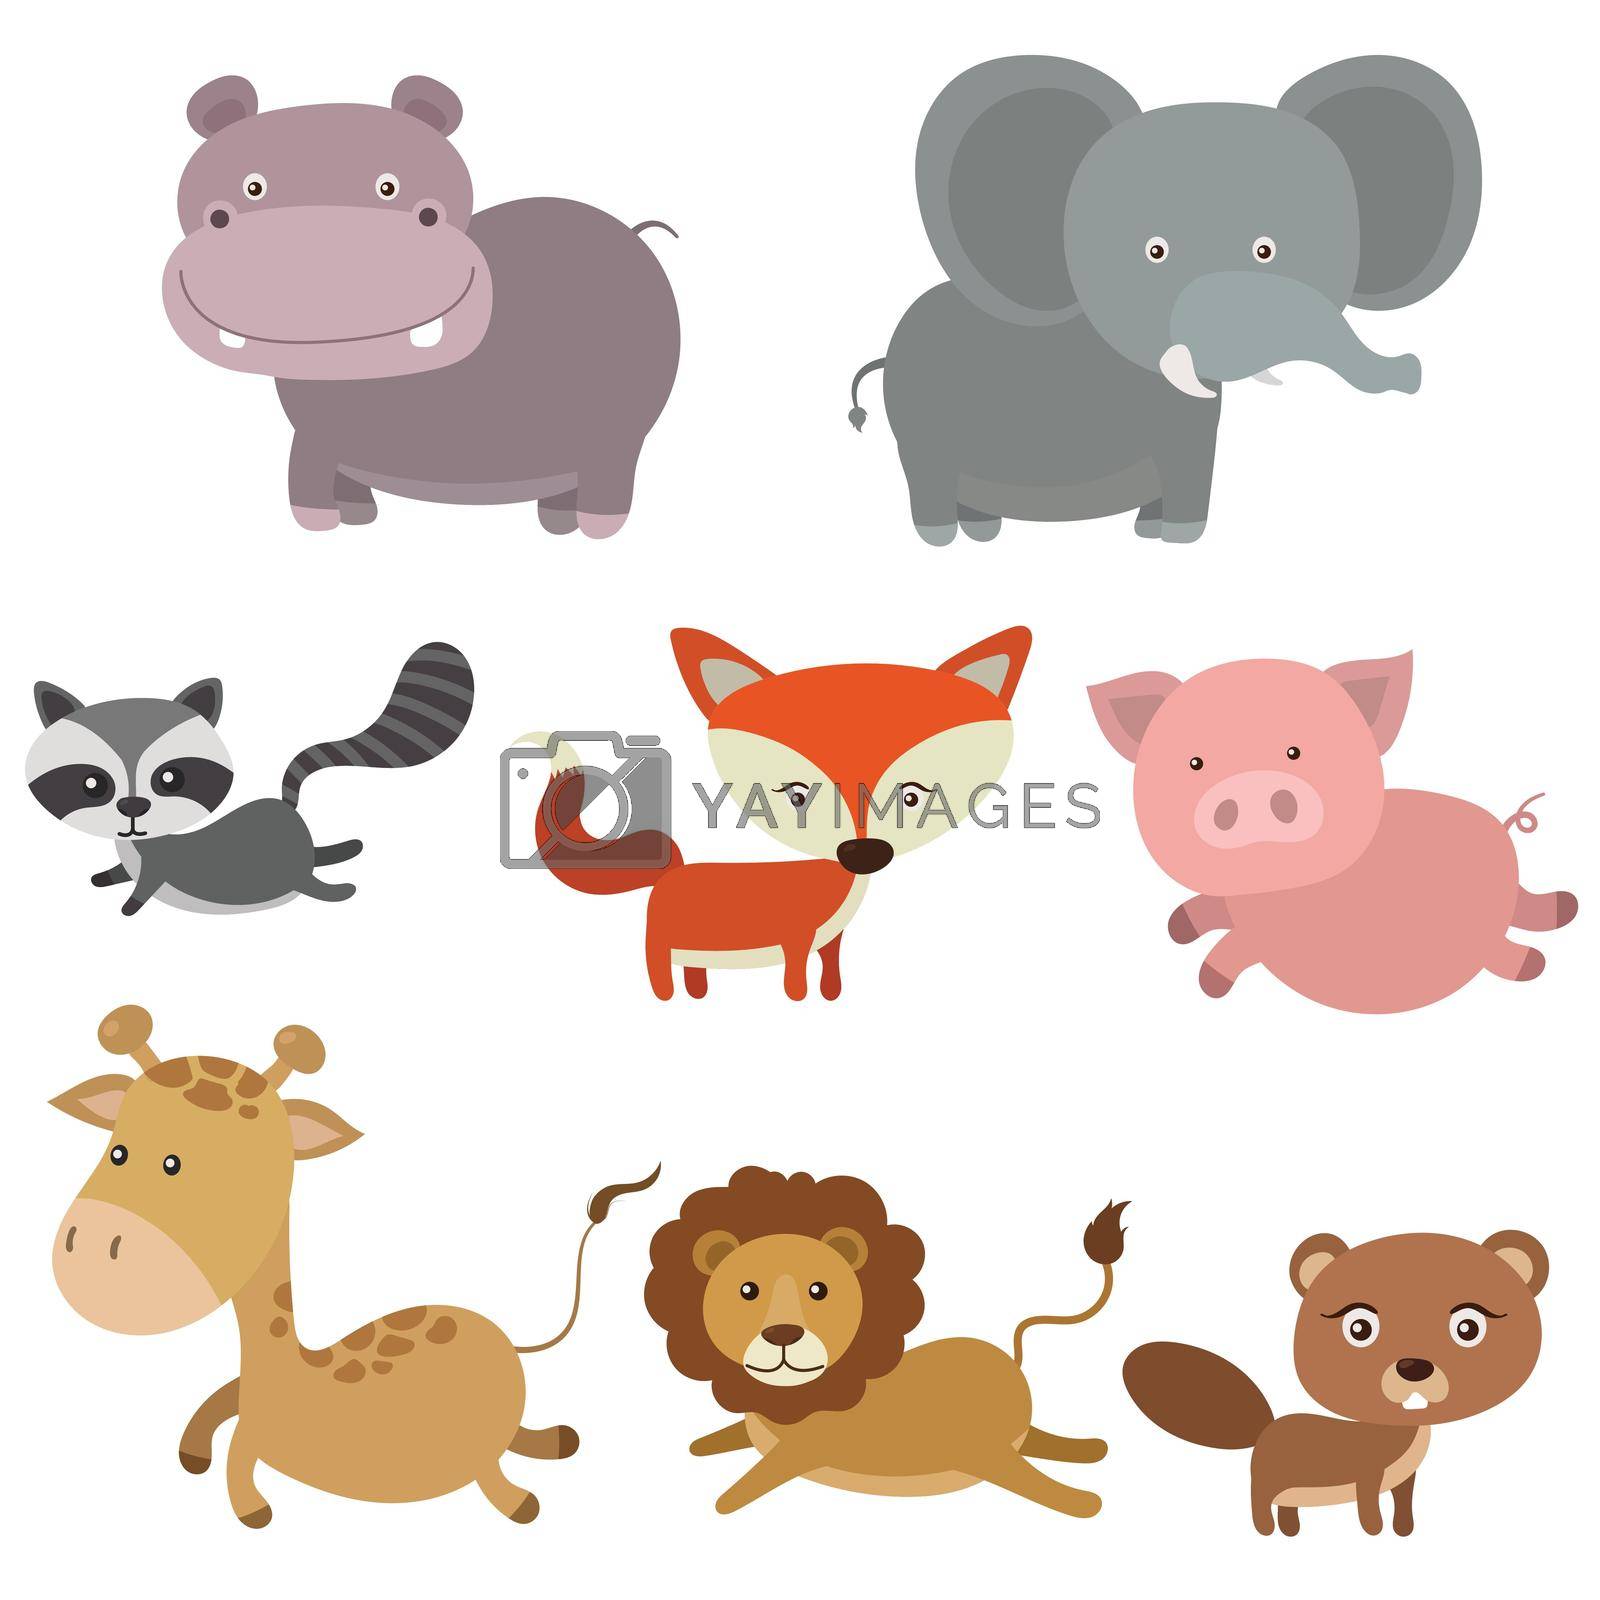 Royalty free image of Animals cartoon in flat style by valueinvestor